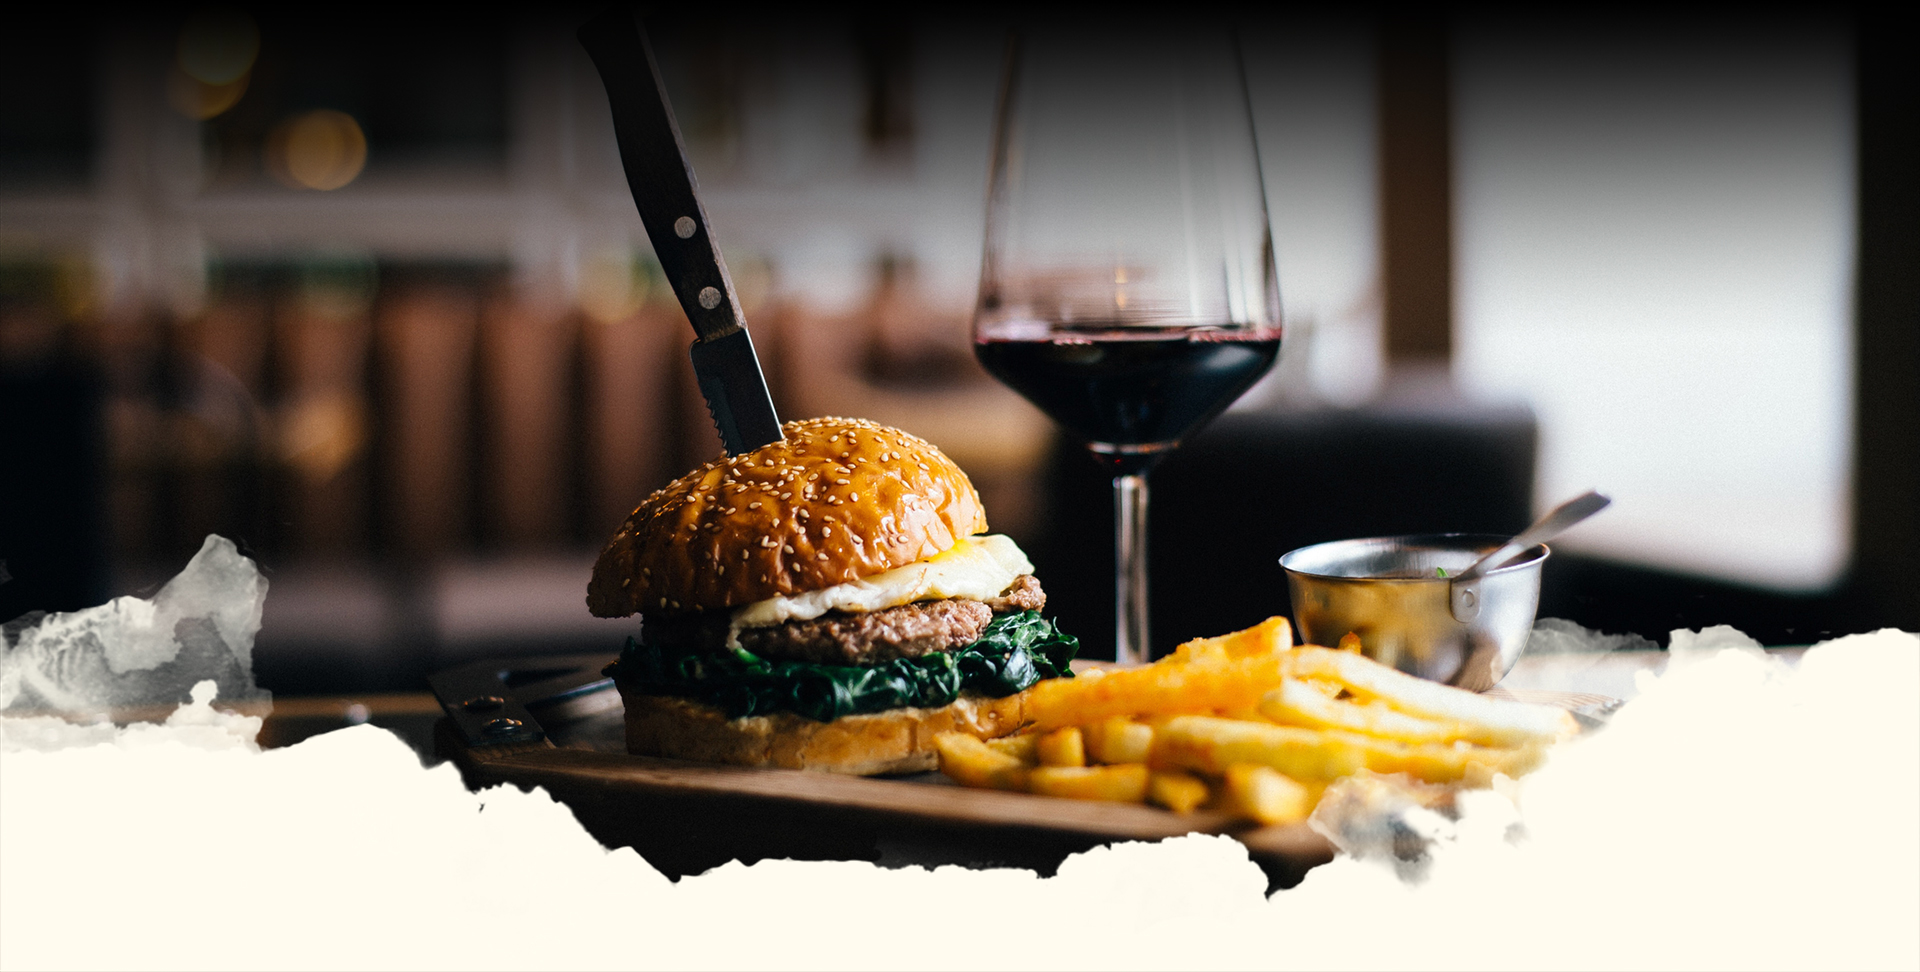 a burger with fries in a plate with a glass of wine